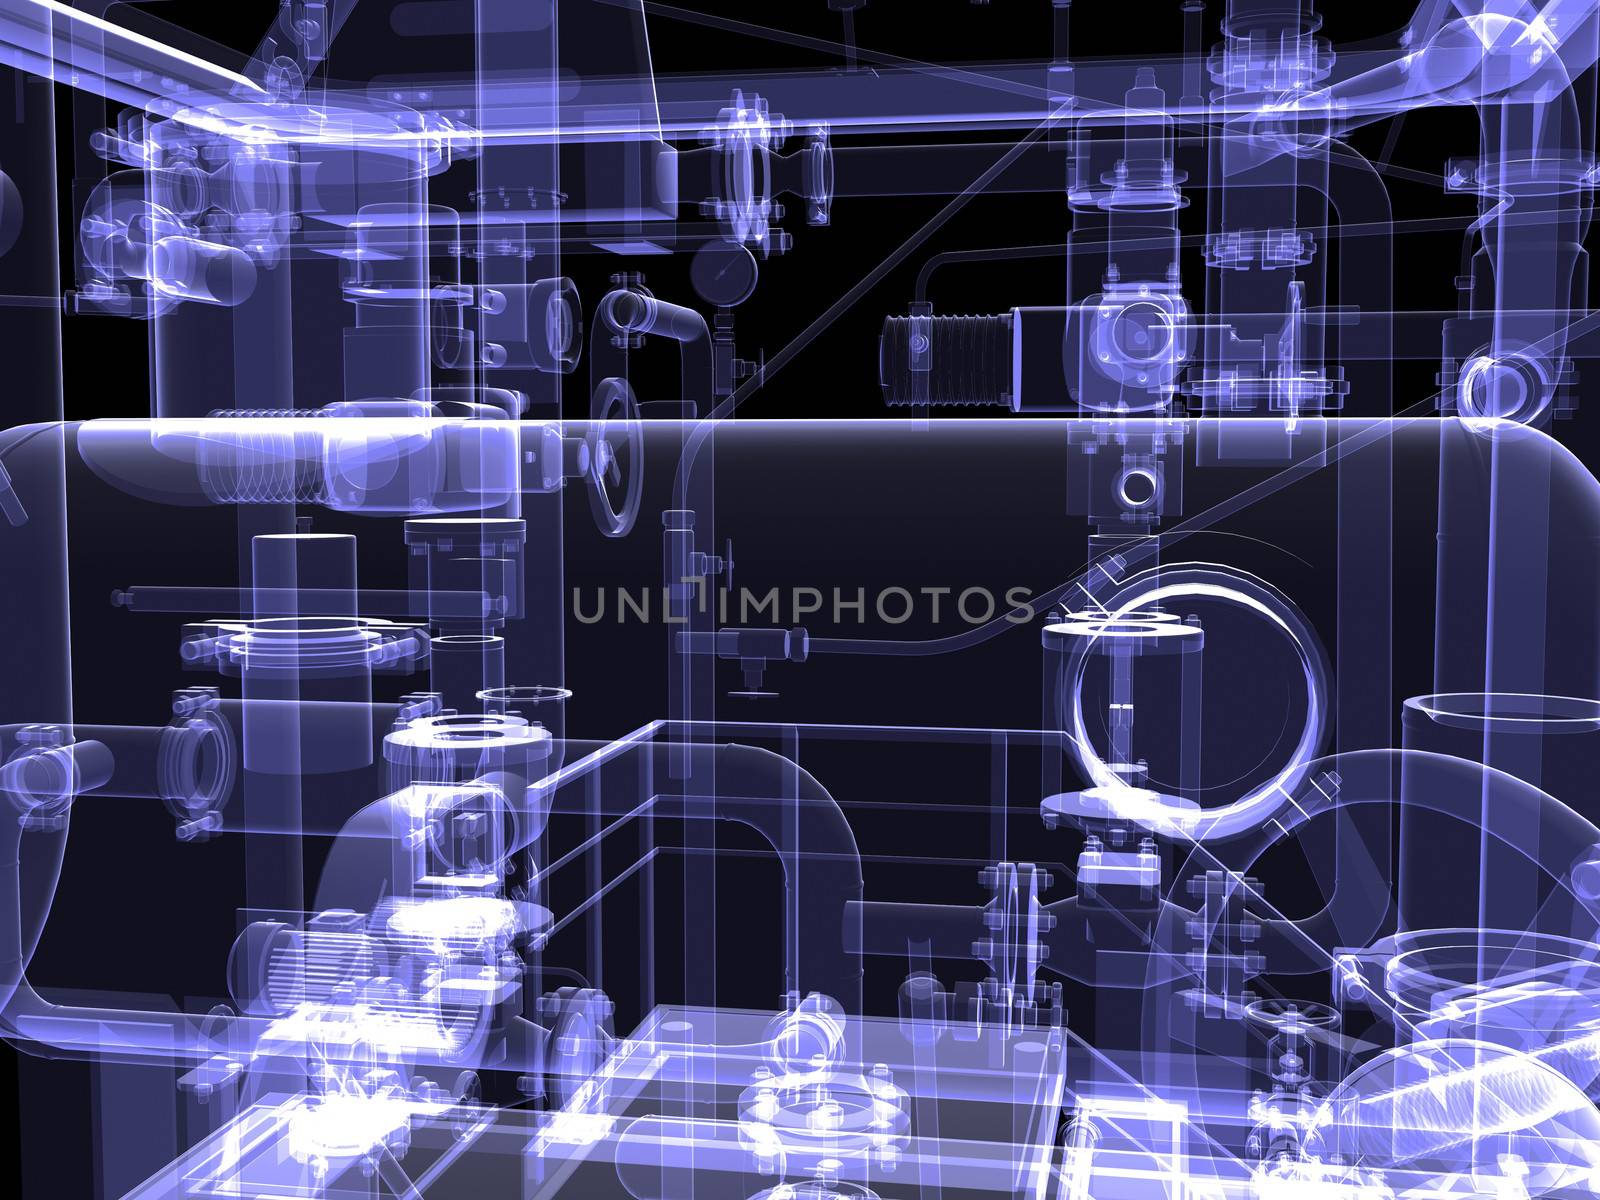 Industrial equipment. X-Ray render isolated on a black background